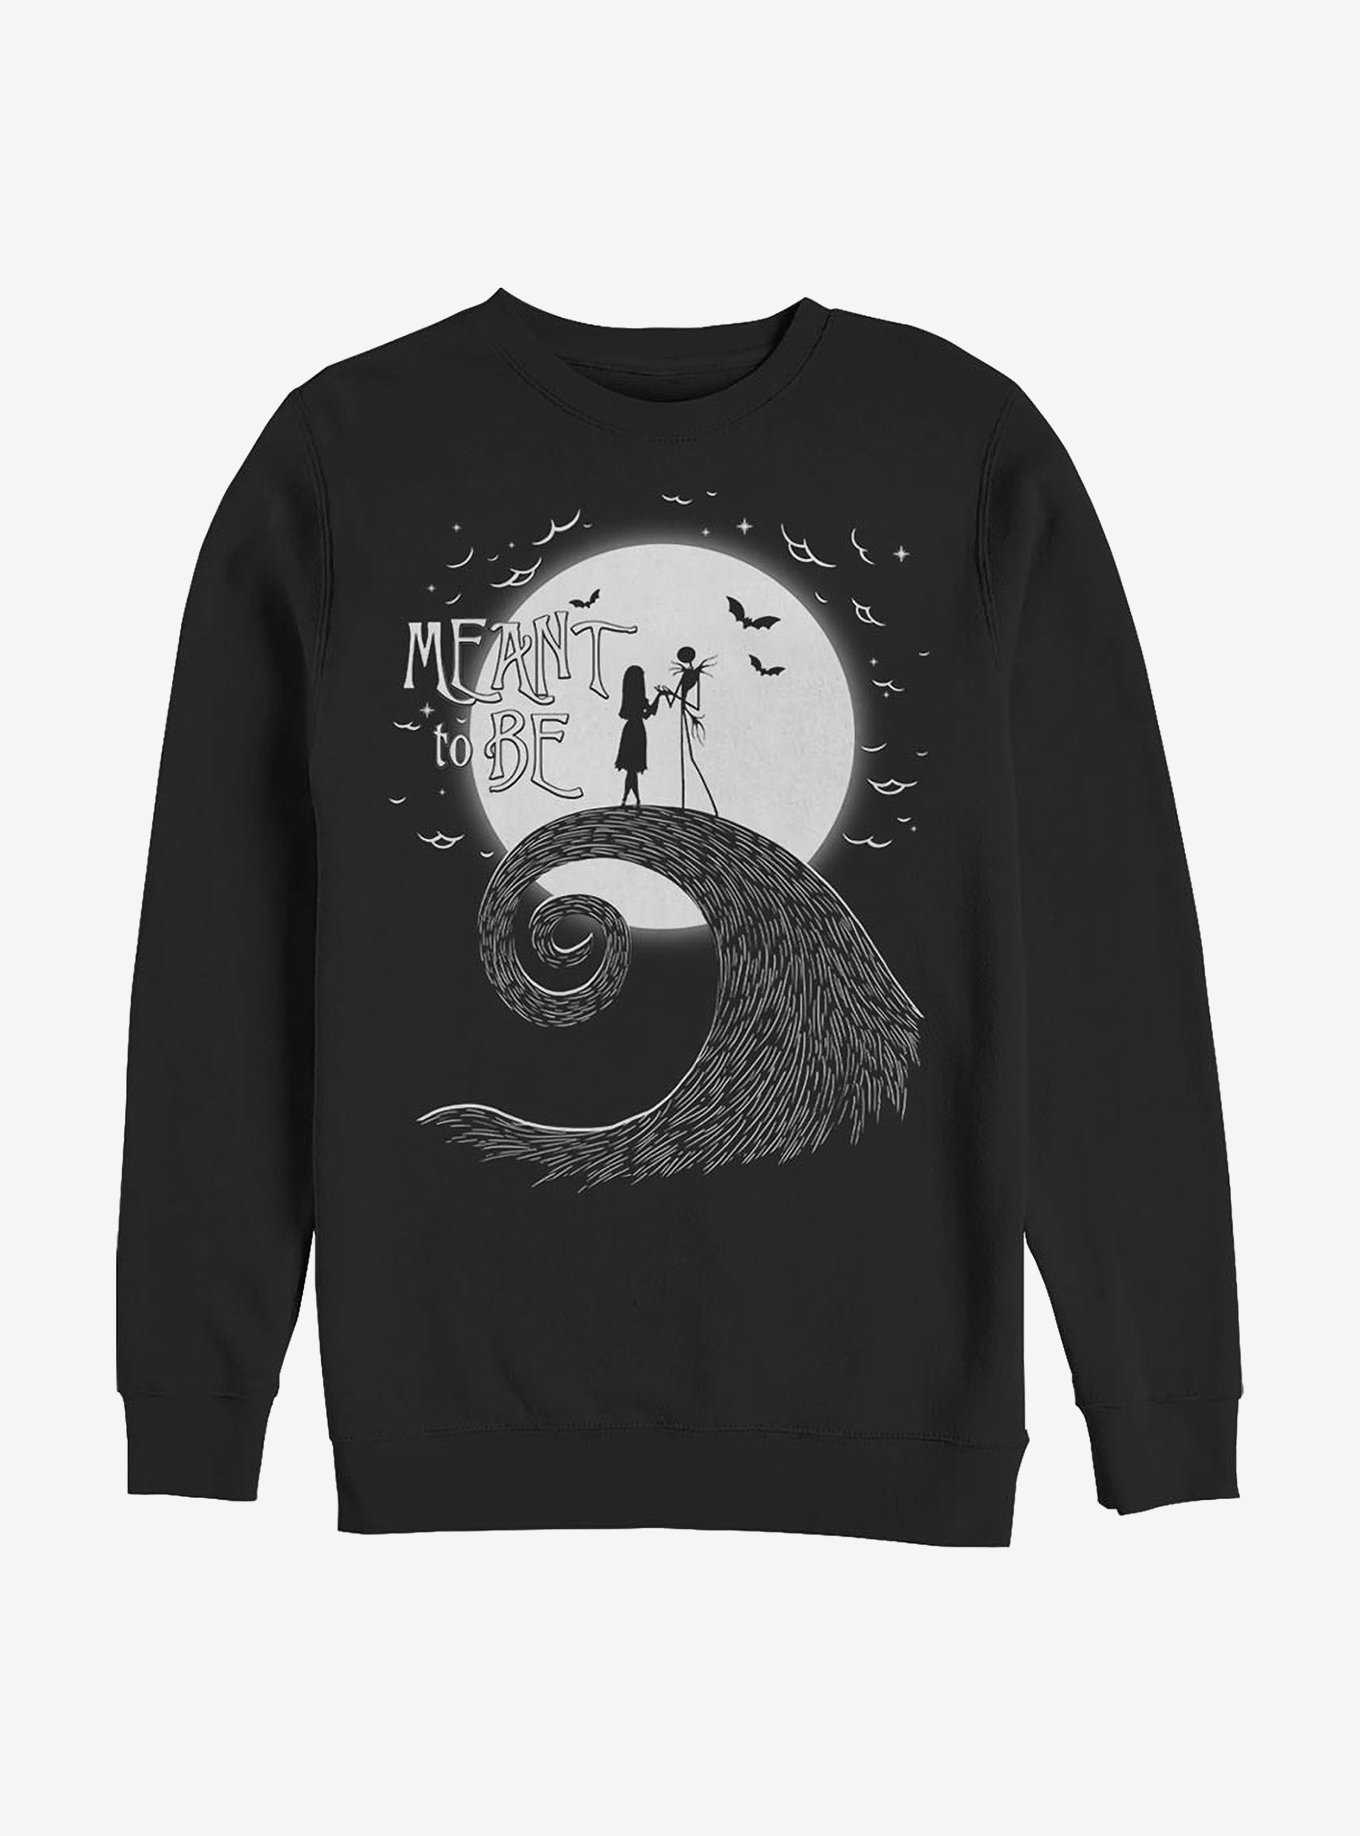 The Nightmare Before Christmas Jack & Sally Meant To Be Sweatshirt, , hi-res